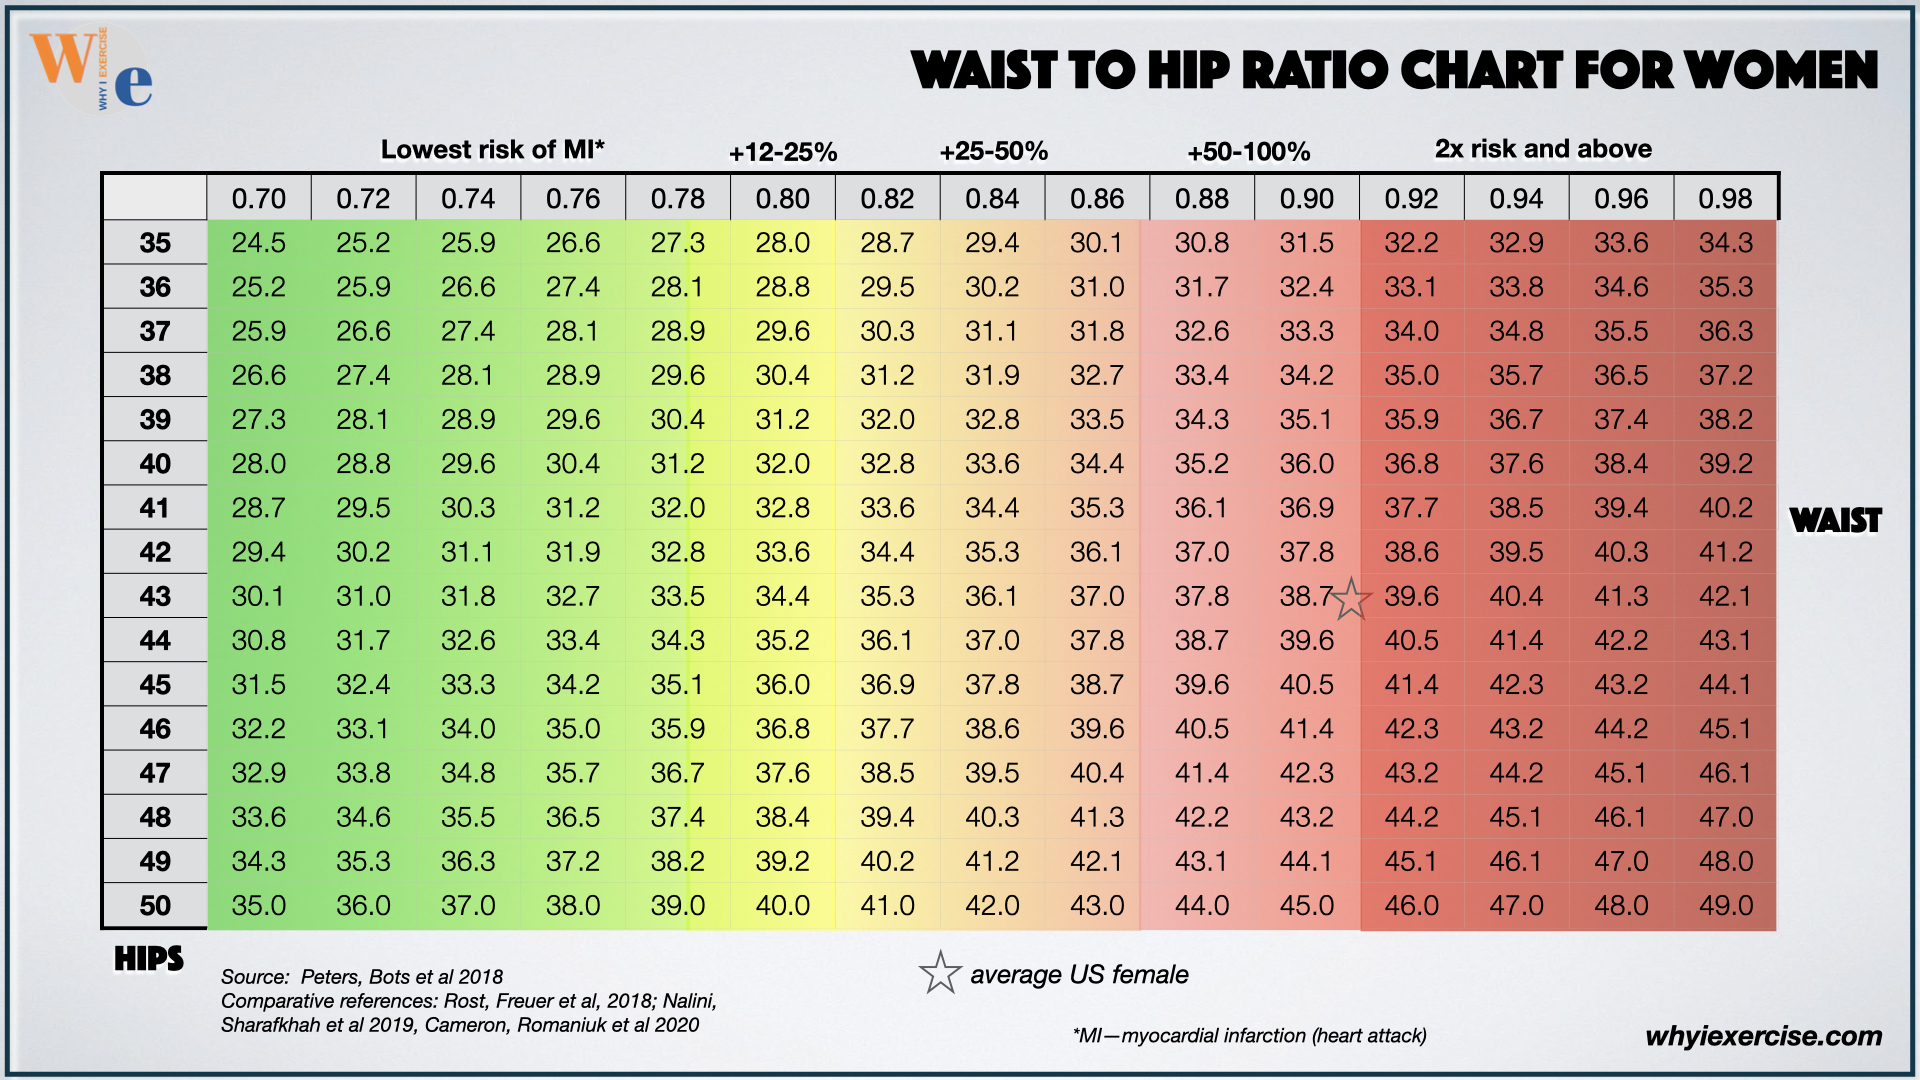 Waist circumference and waist-to-height ratio guidelines